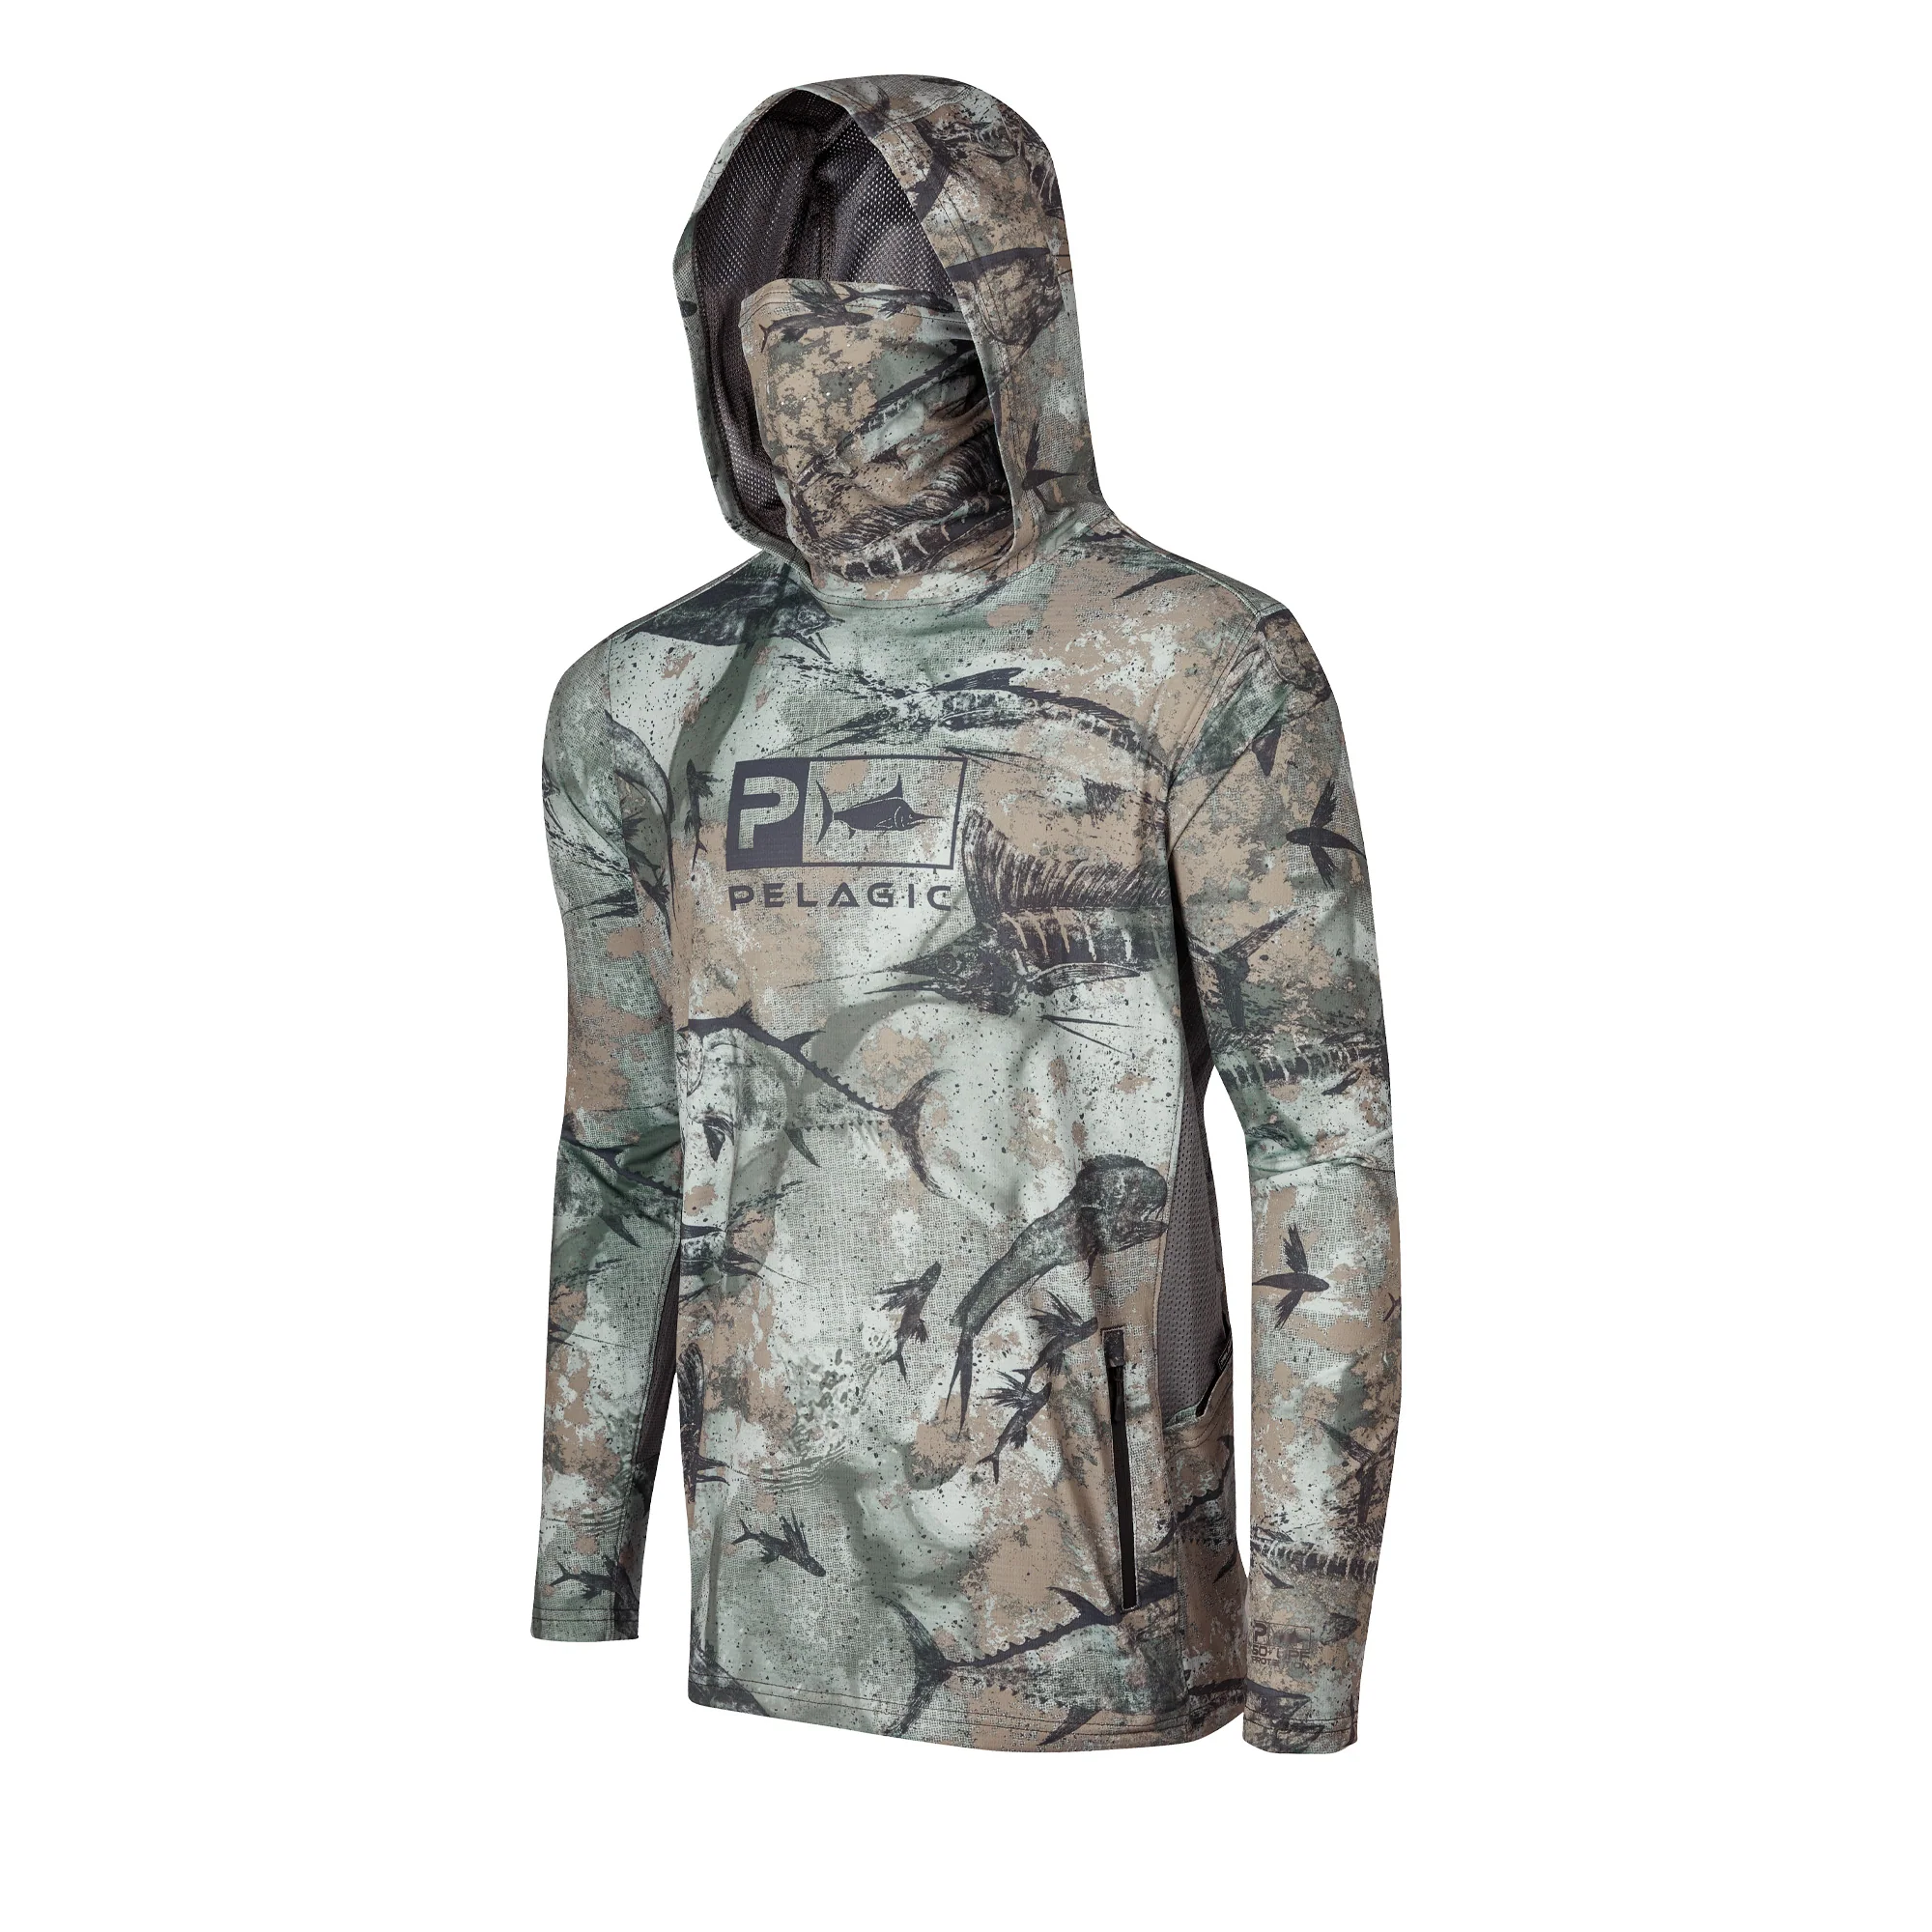 UV hooded top with face mask PELAGIC UPF 50+ EXO-TECH HOODED